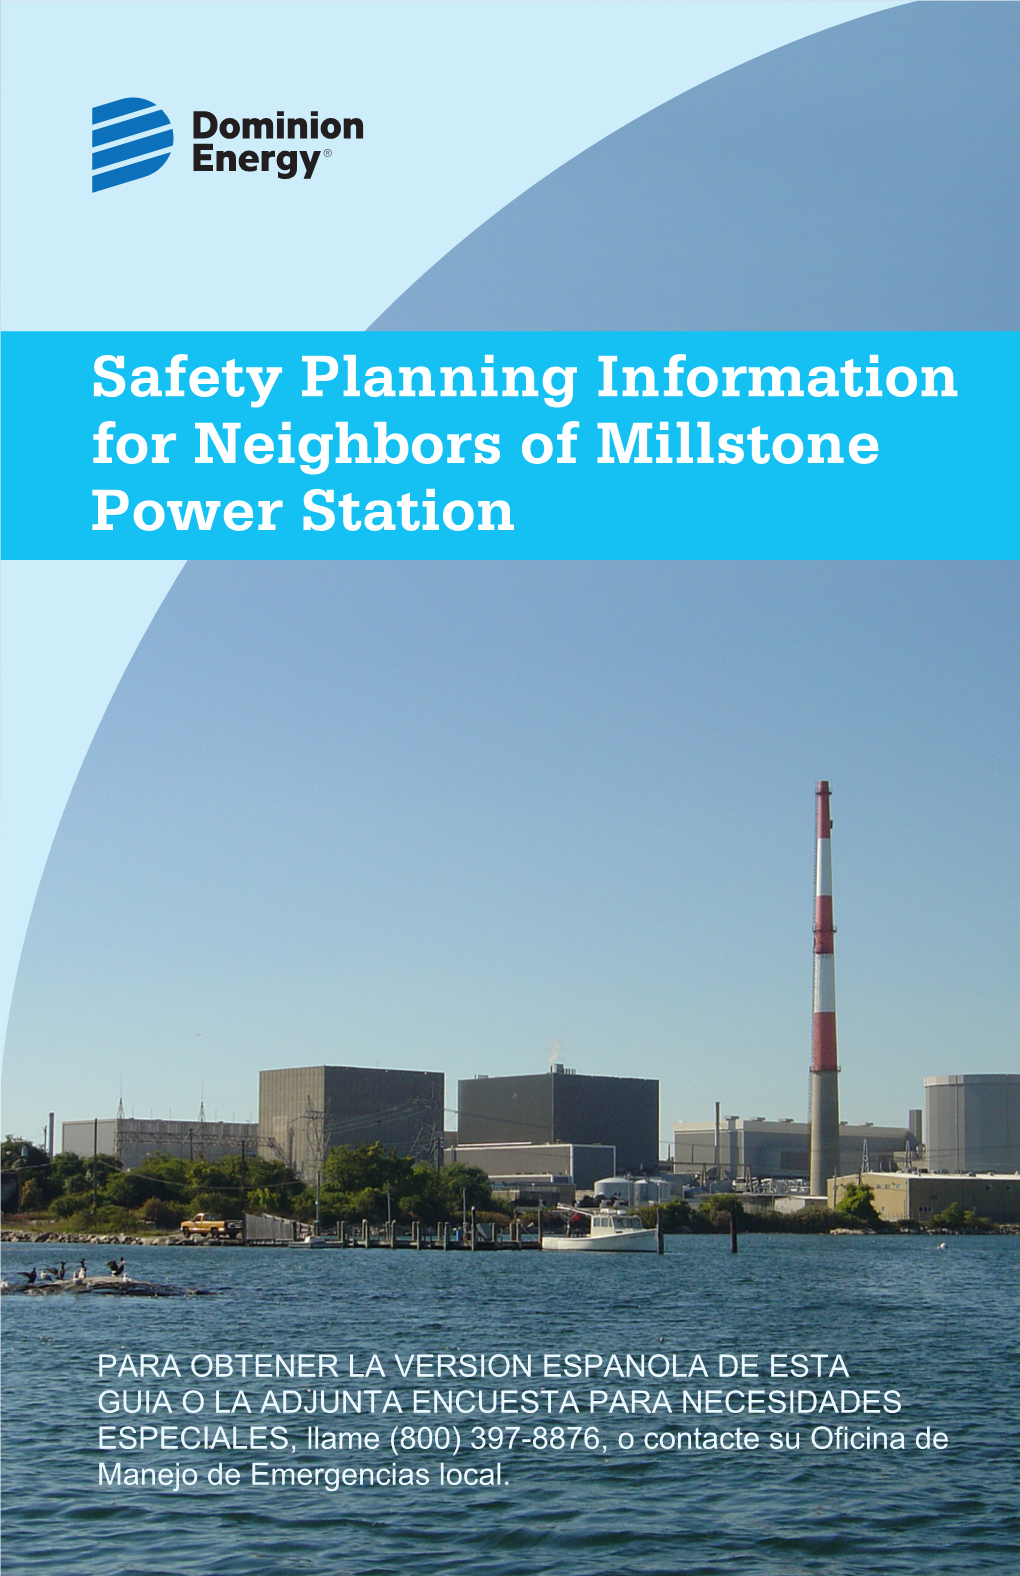 Safety Planning Information for Neighbors of Millstone Power Station